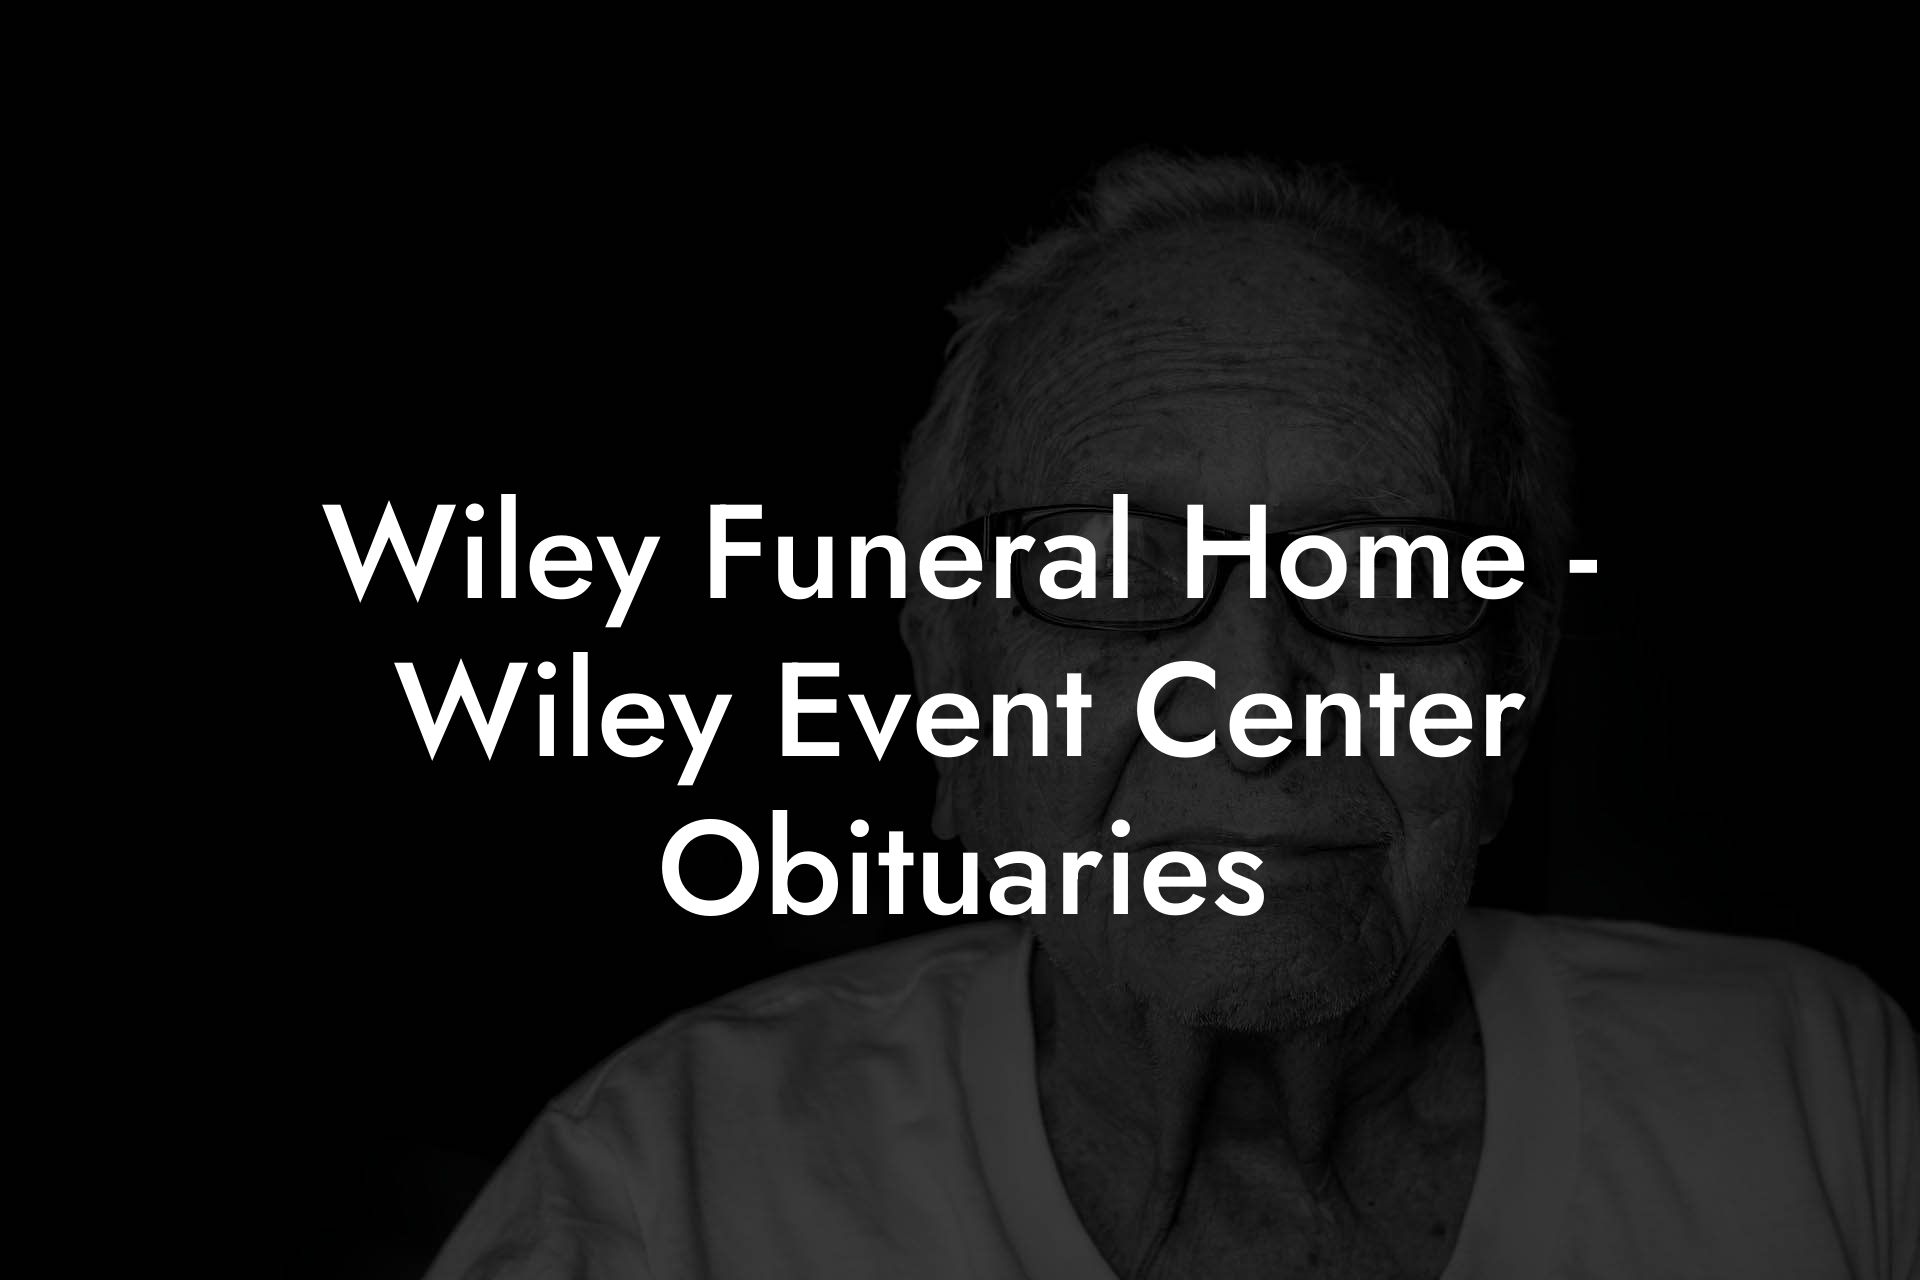 Wiley Funeral Home - Wiley Event Center Obituaries